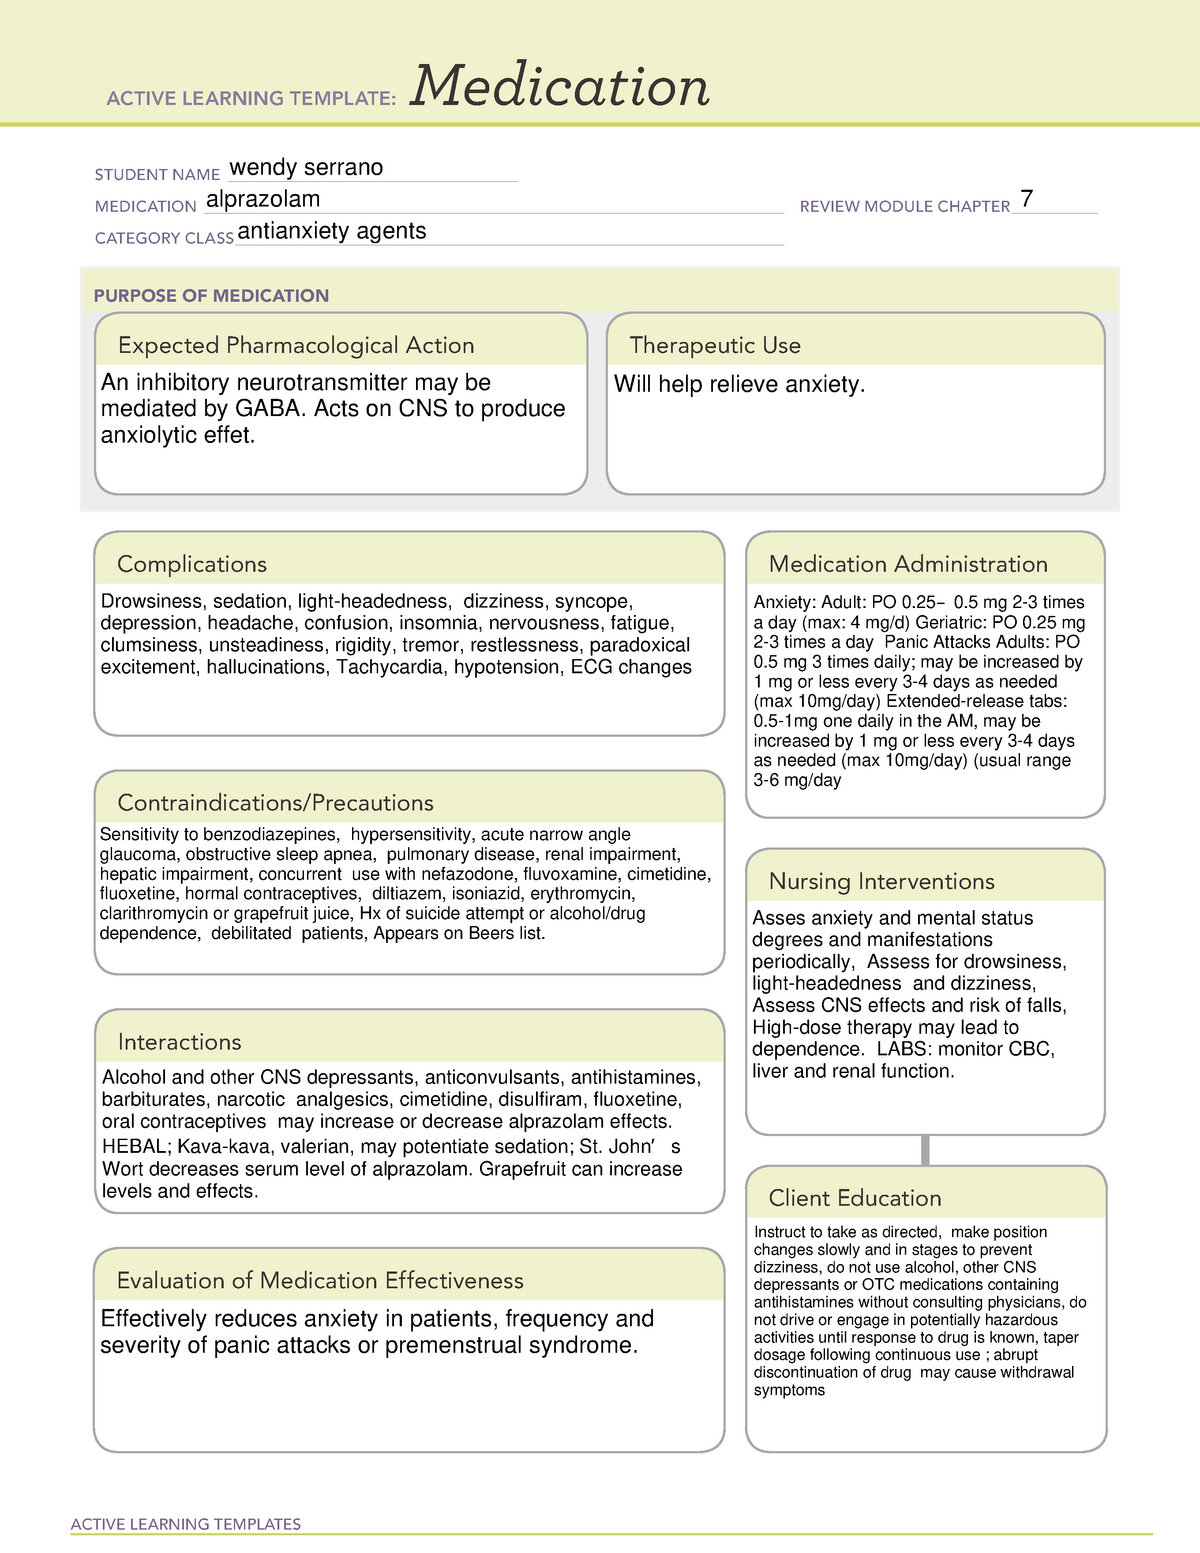 ATI medication template (15) ACTIVE LEARNING TEMPLATES Medication